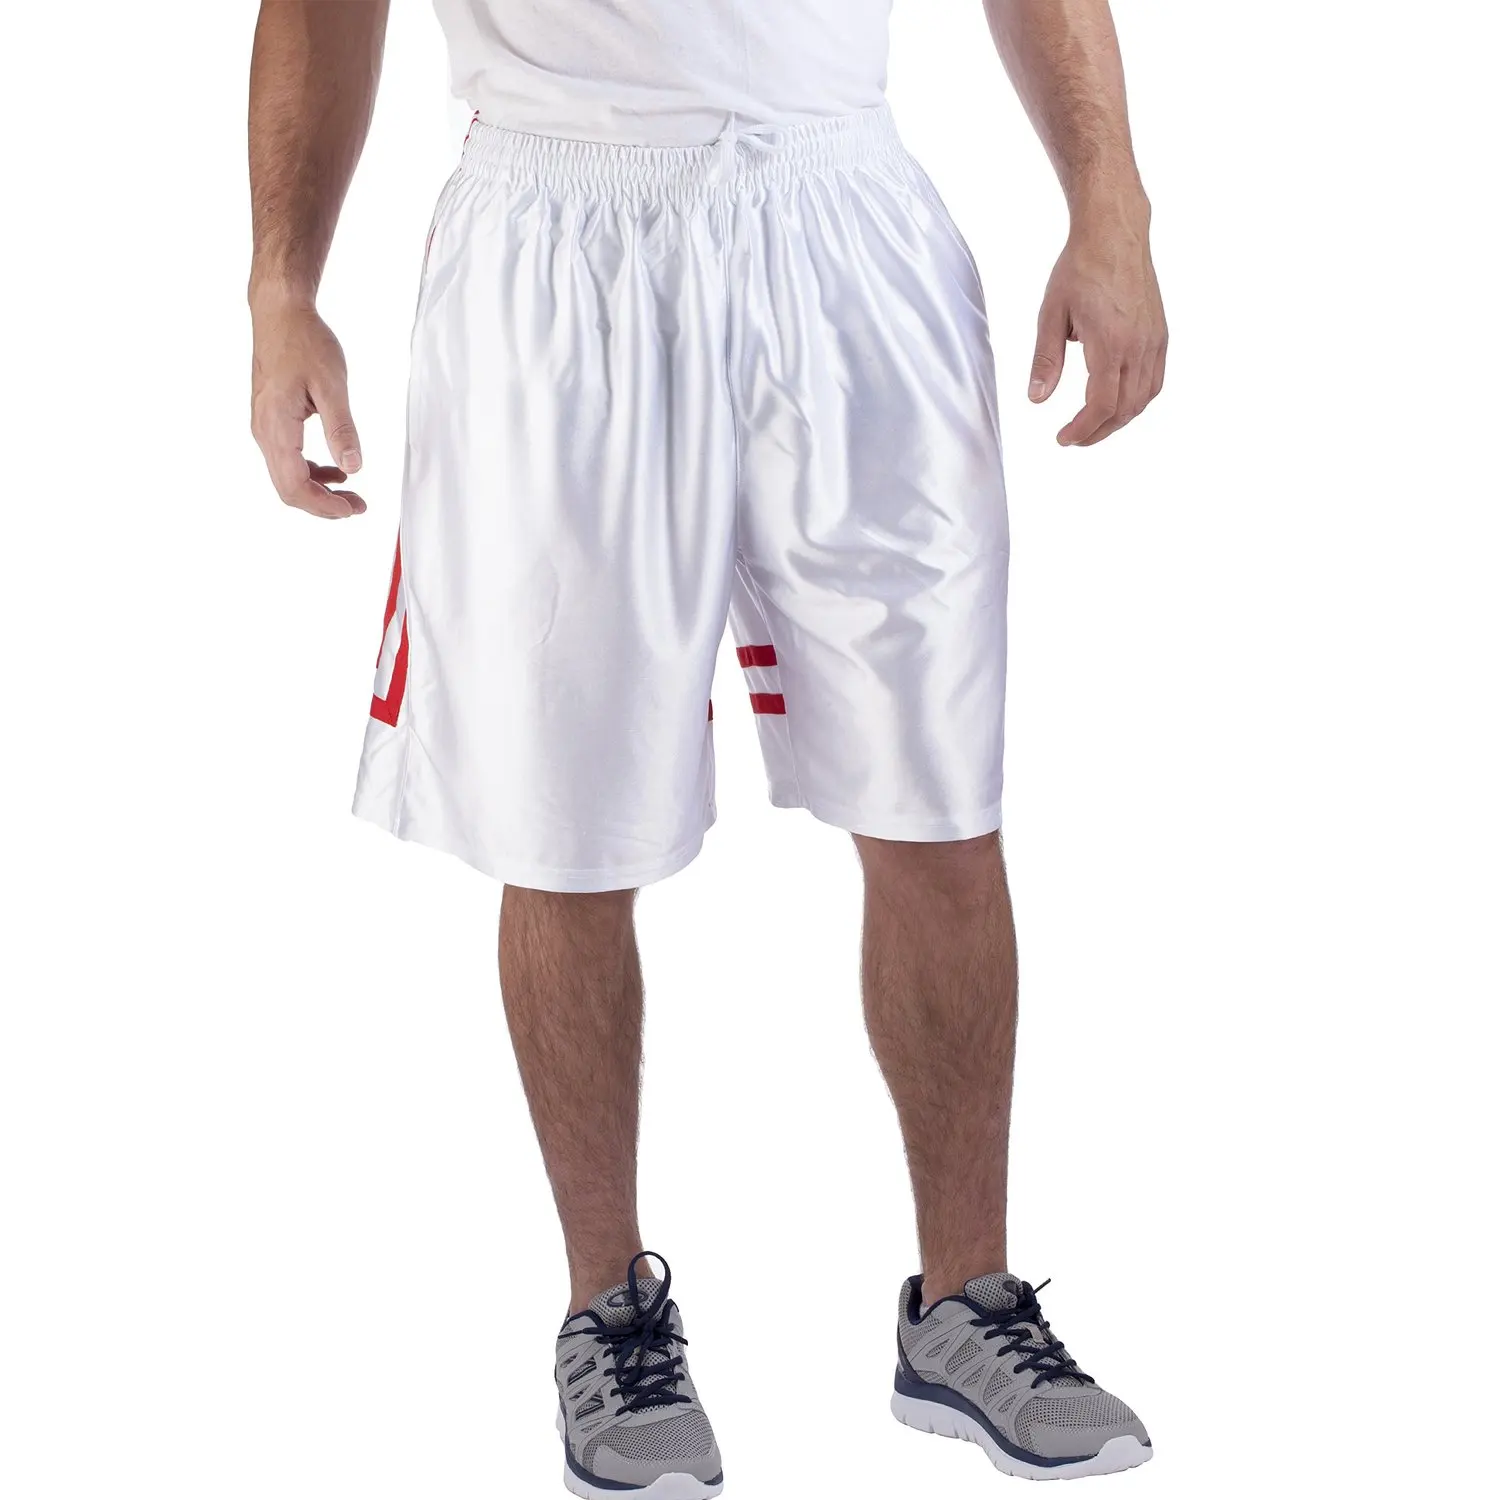 Buy OLLIN1 Mens Active Basketball Short Pants with Elastic Waistband in ...